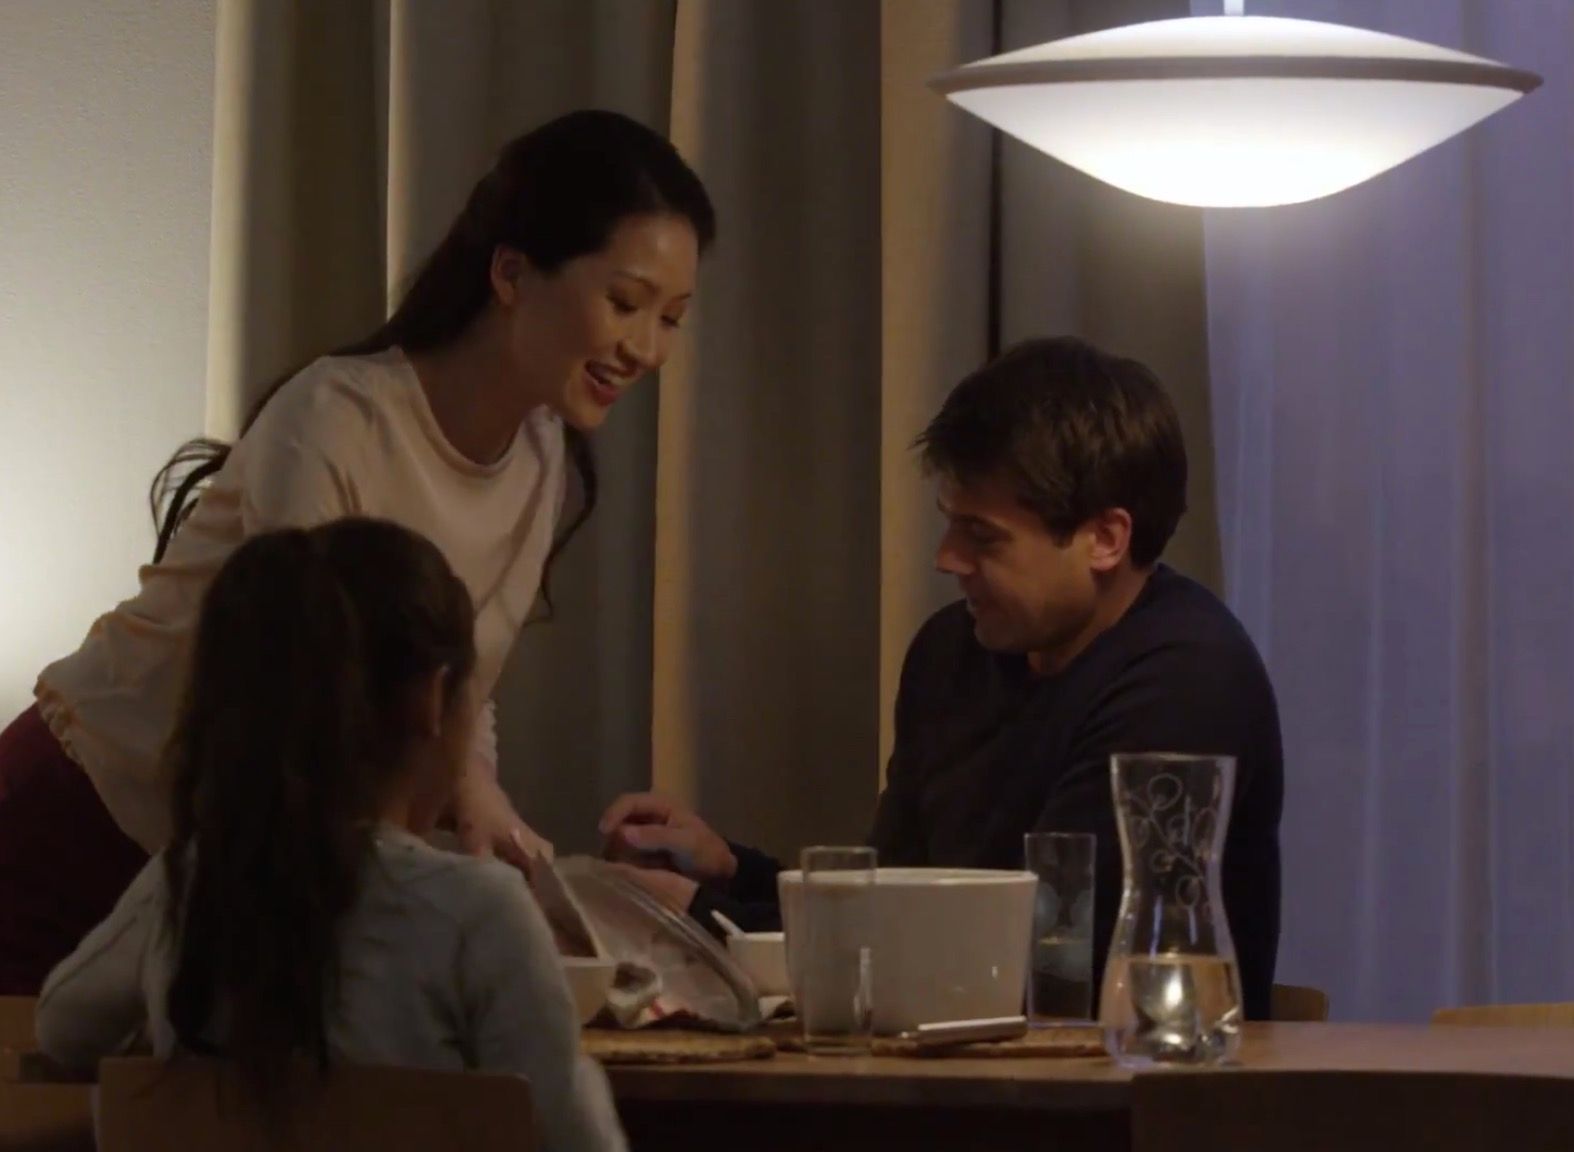 philips hue phoenix is a new range of smart lamps that glow every shade of white light image 1